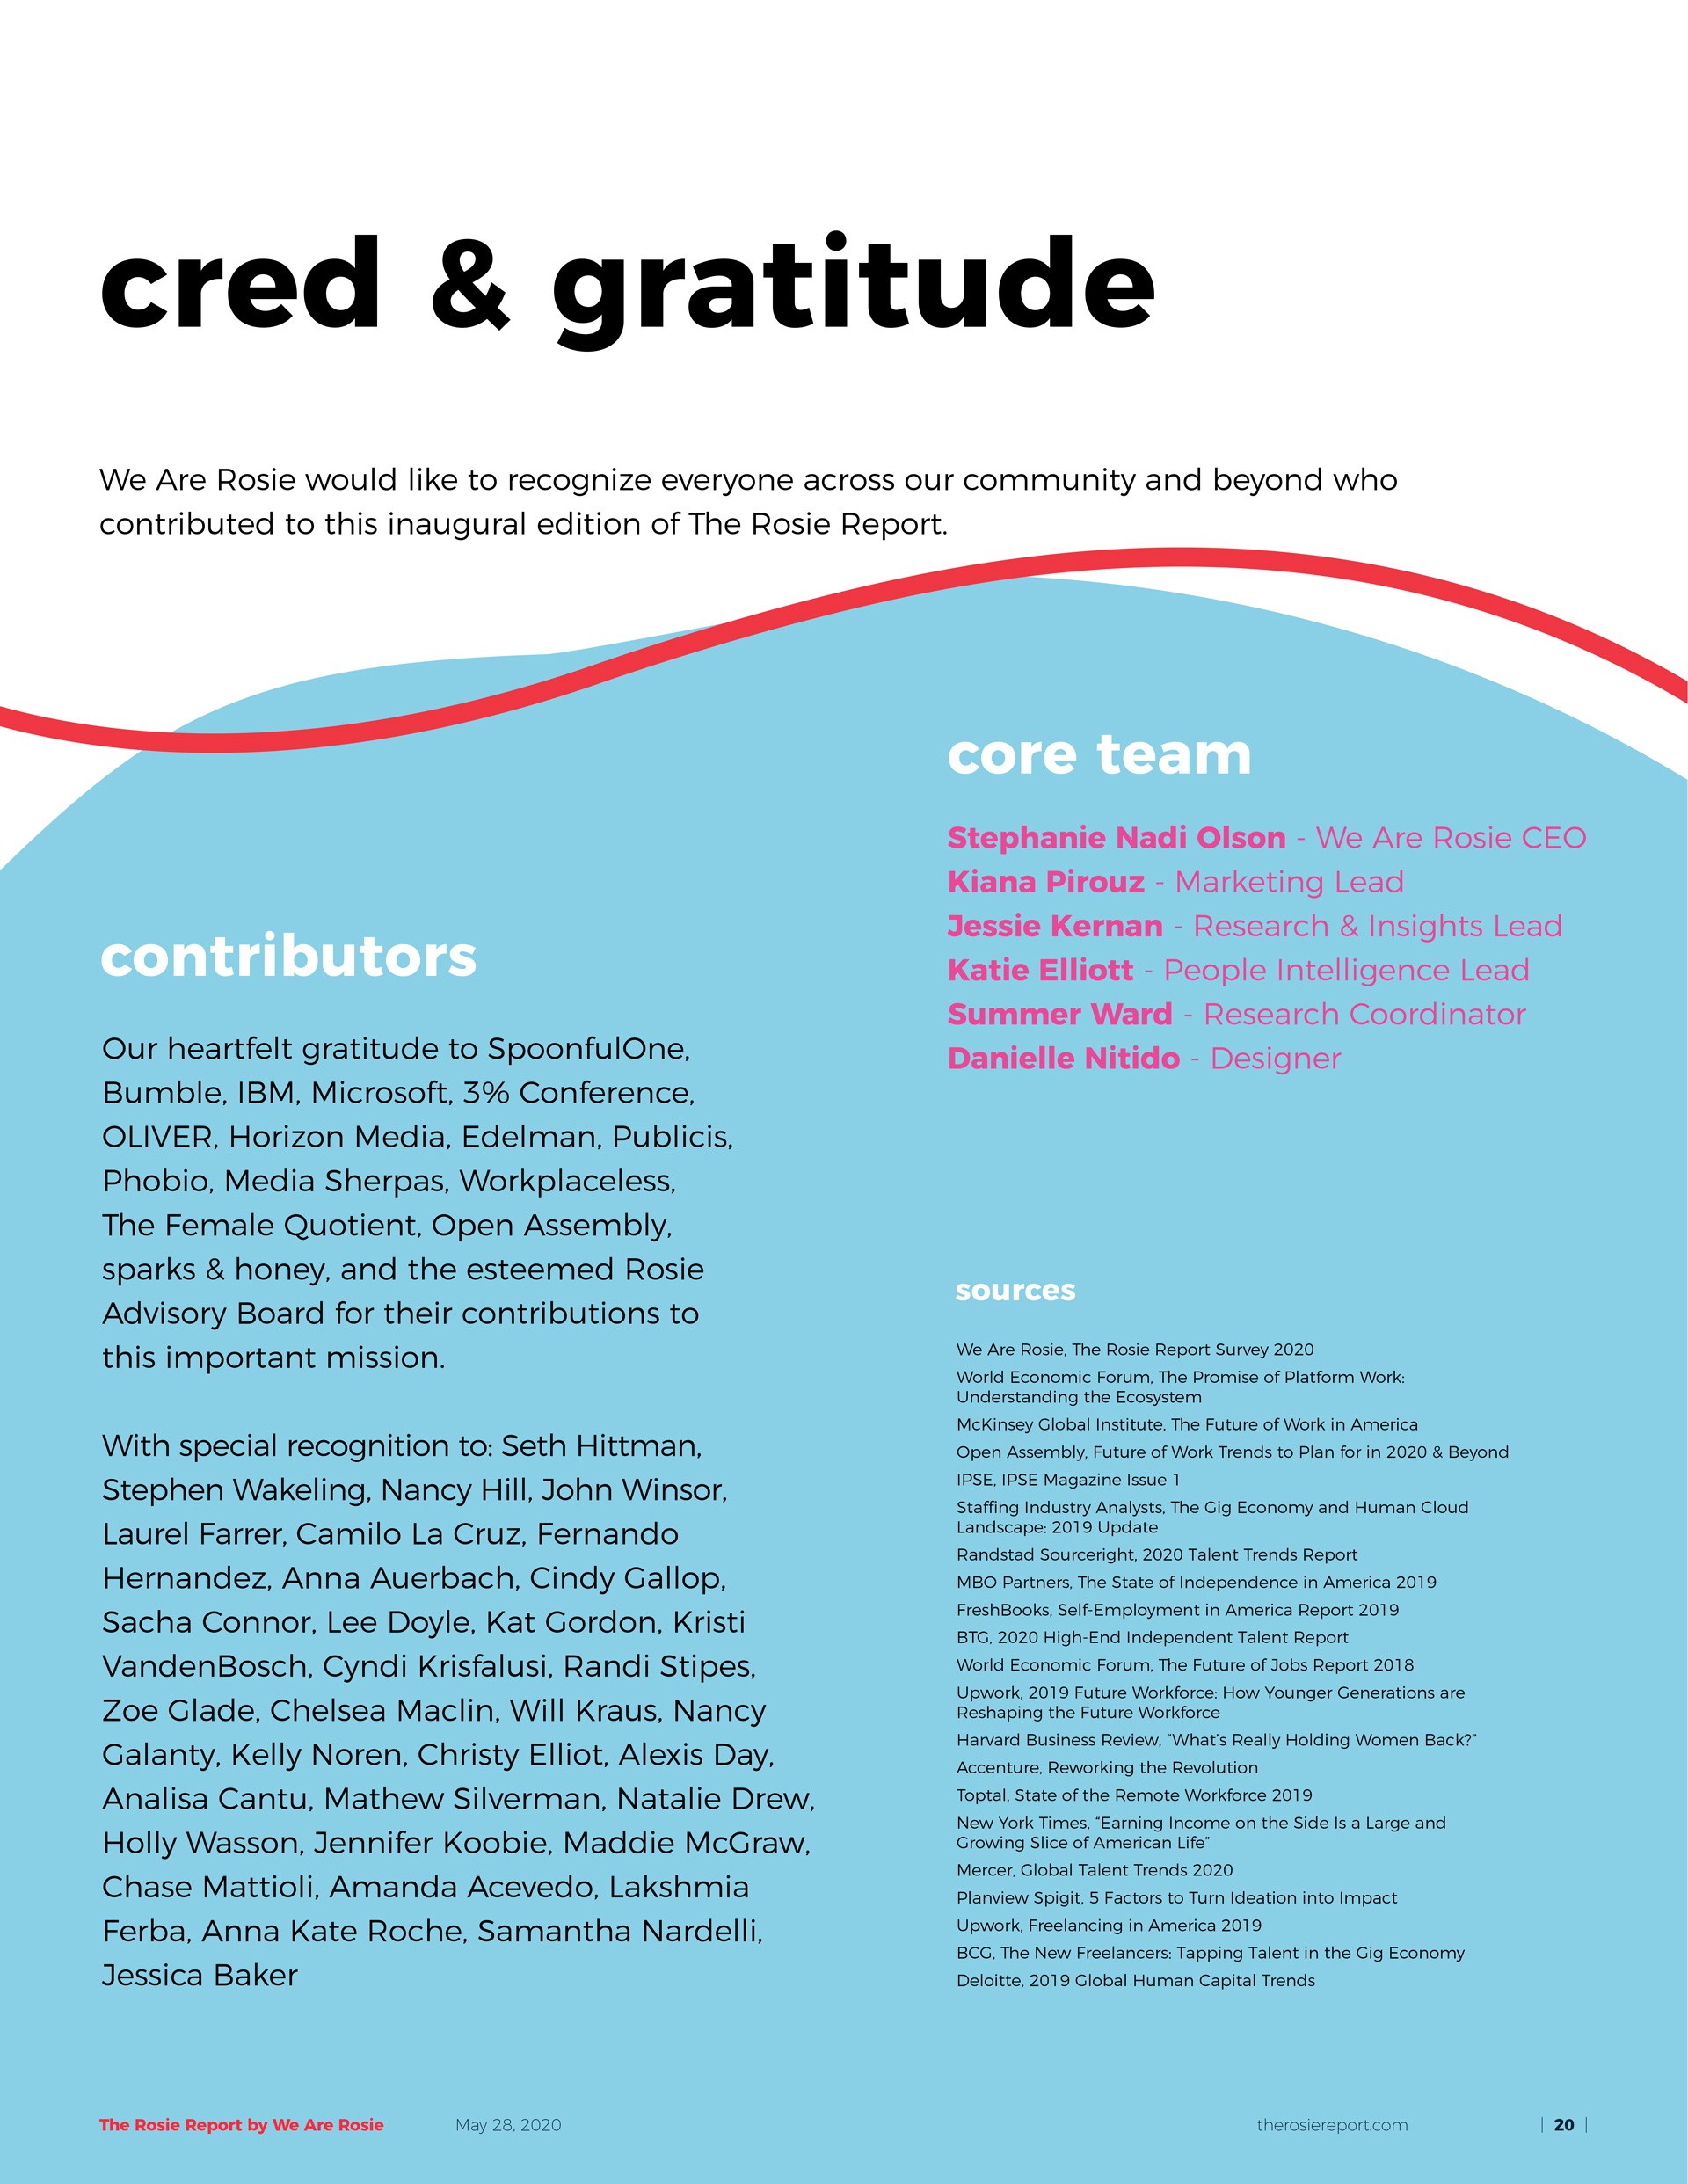 Cred & Gratitude Page